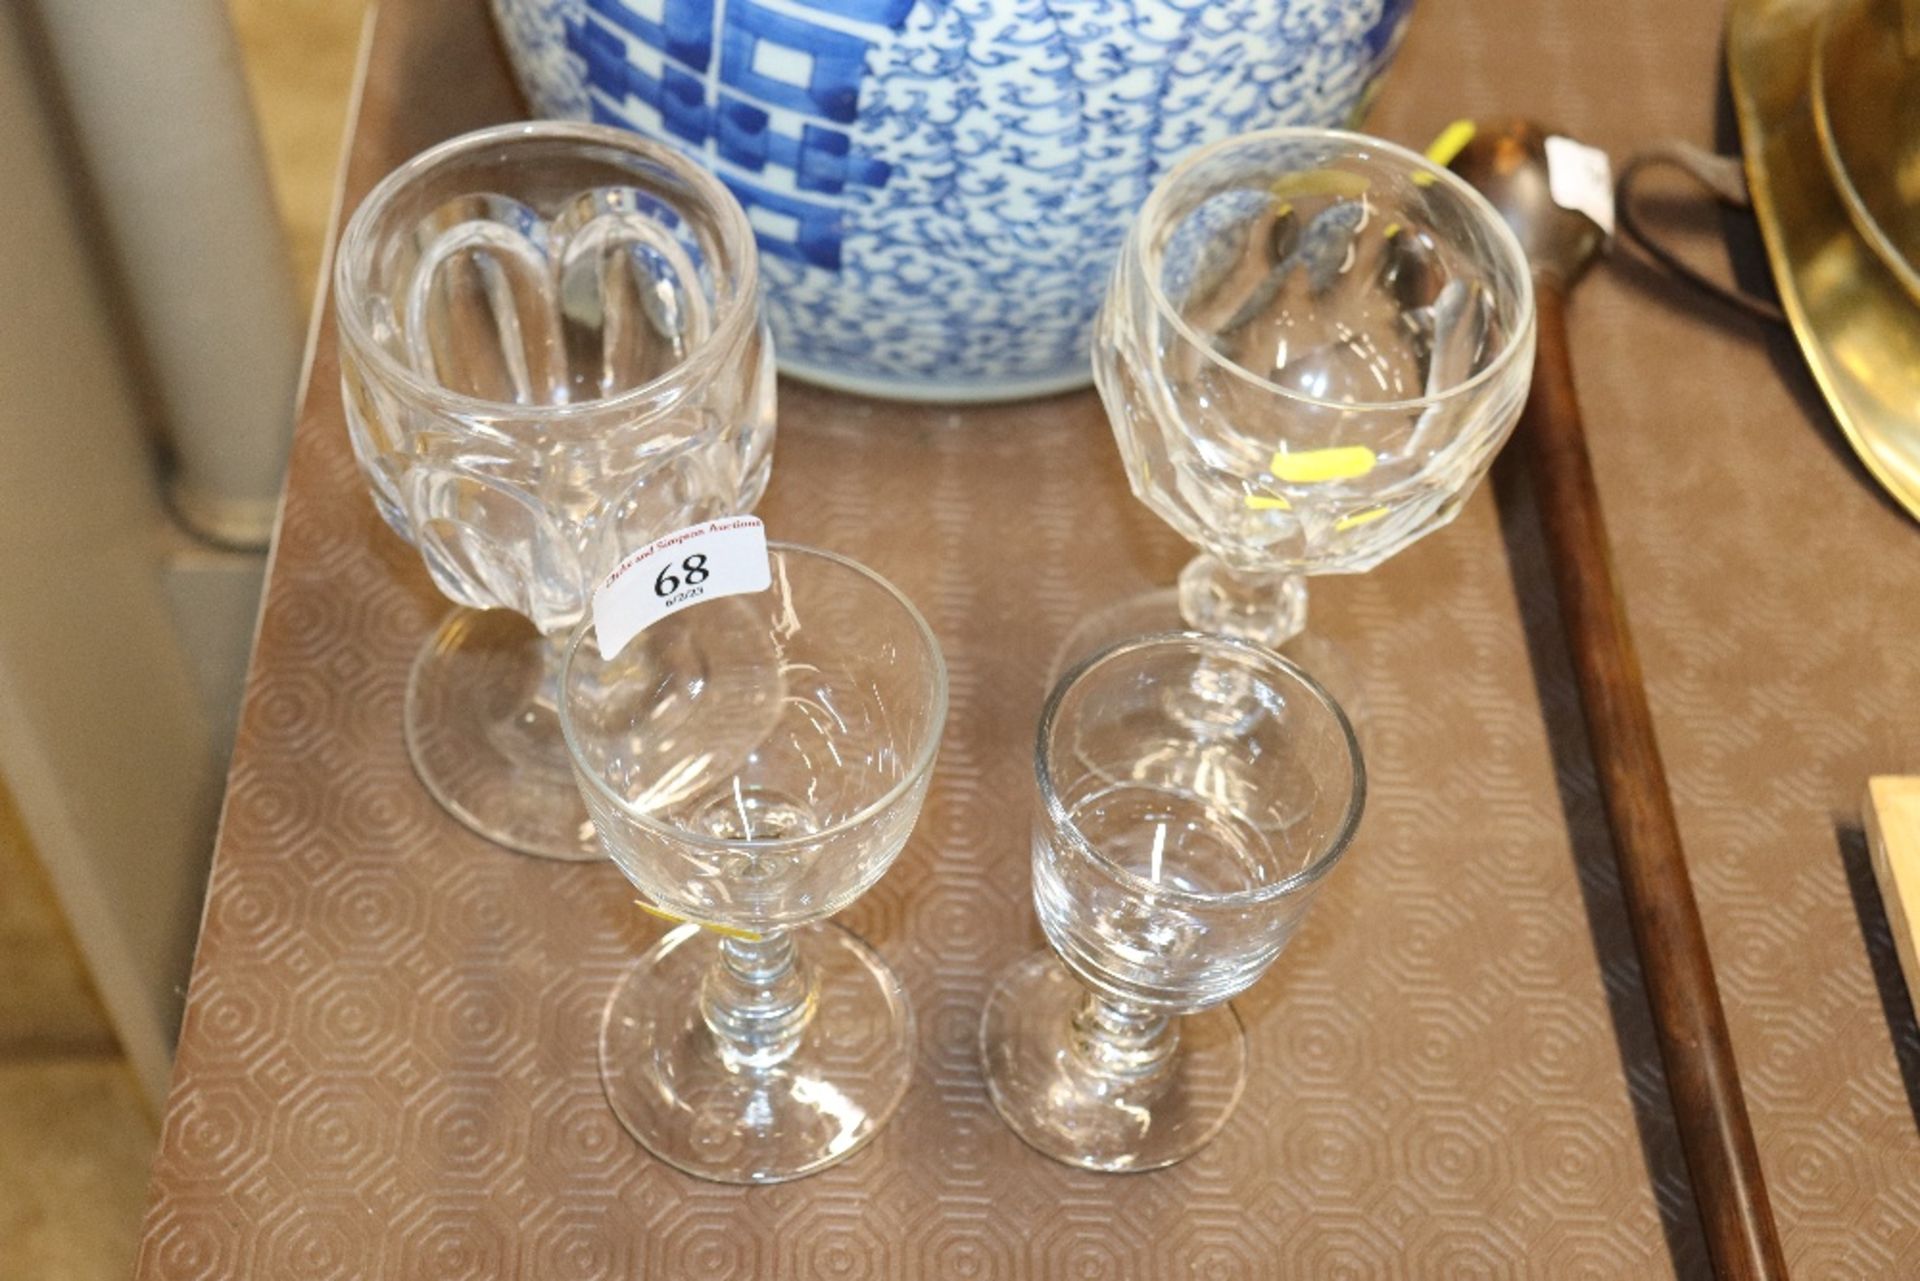 Four various wine glasses